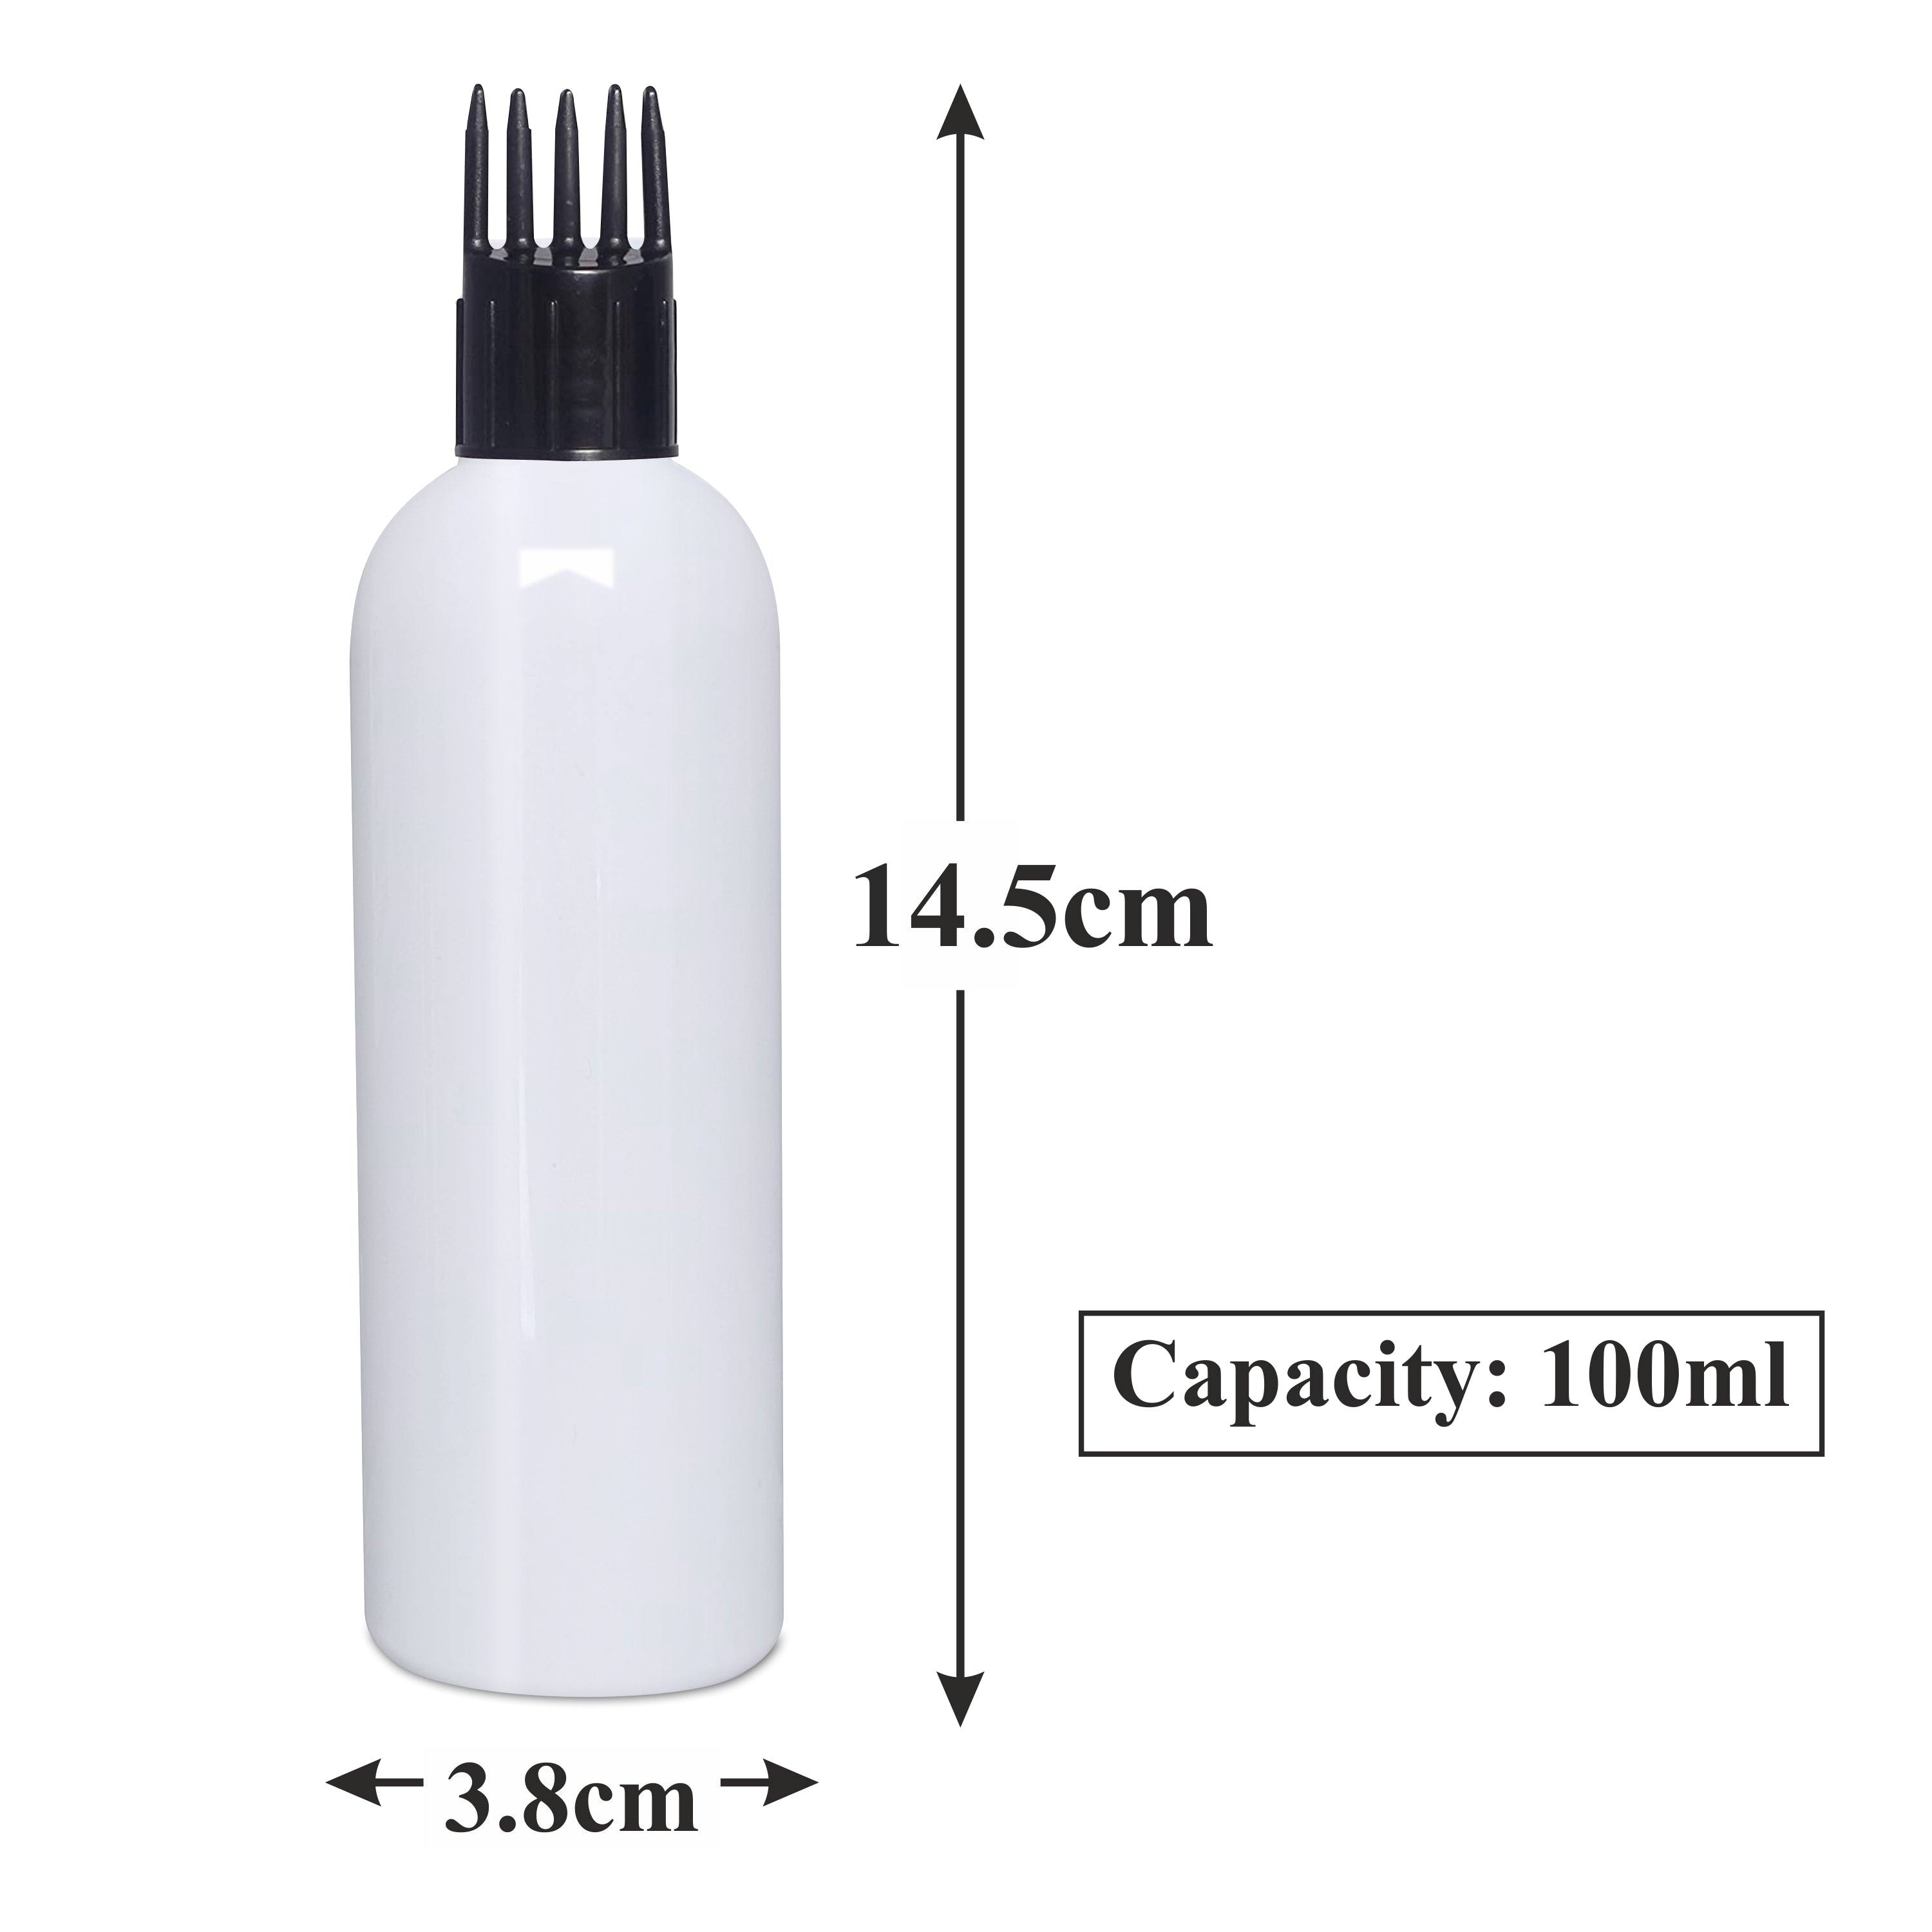 |ZMW55| Milky White Bottle With Black Applicator Cap   Available Size_100ML